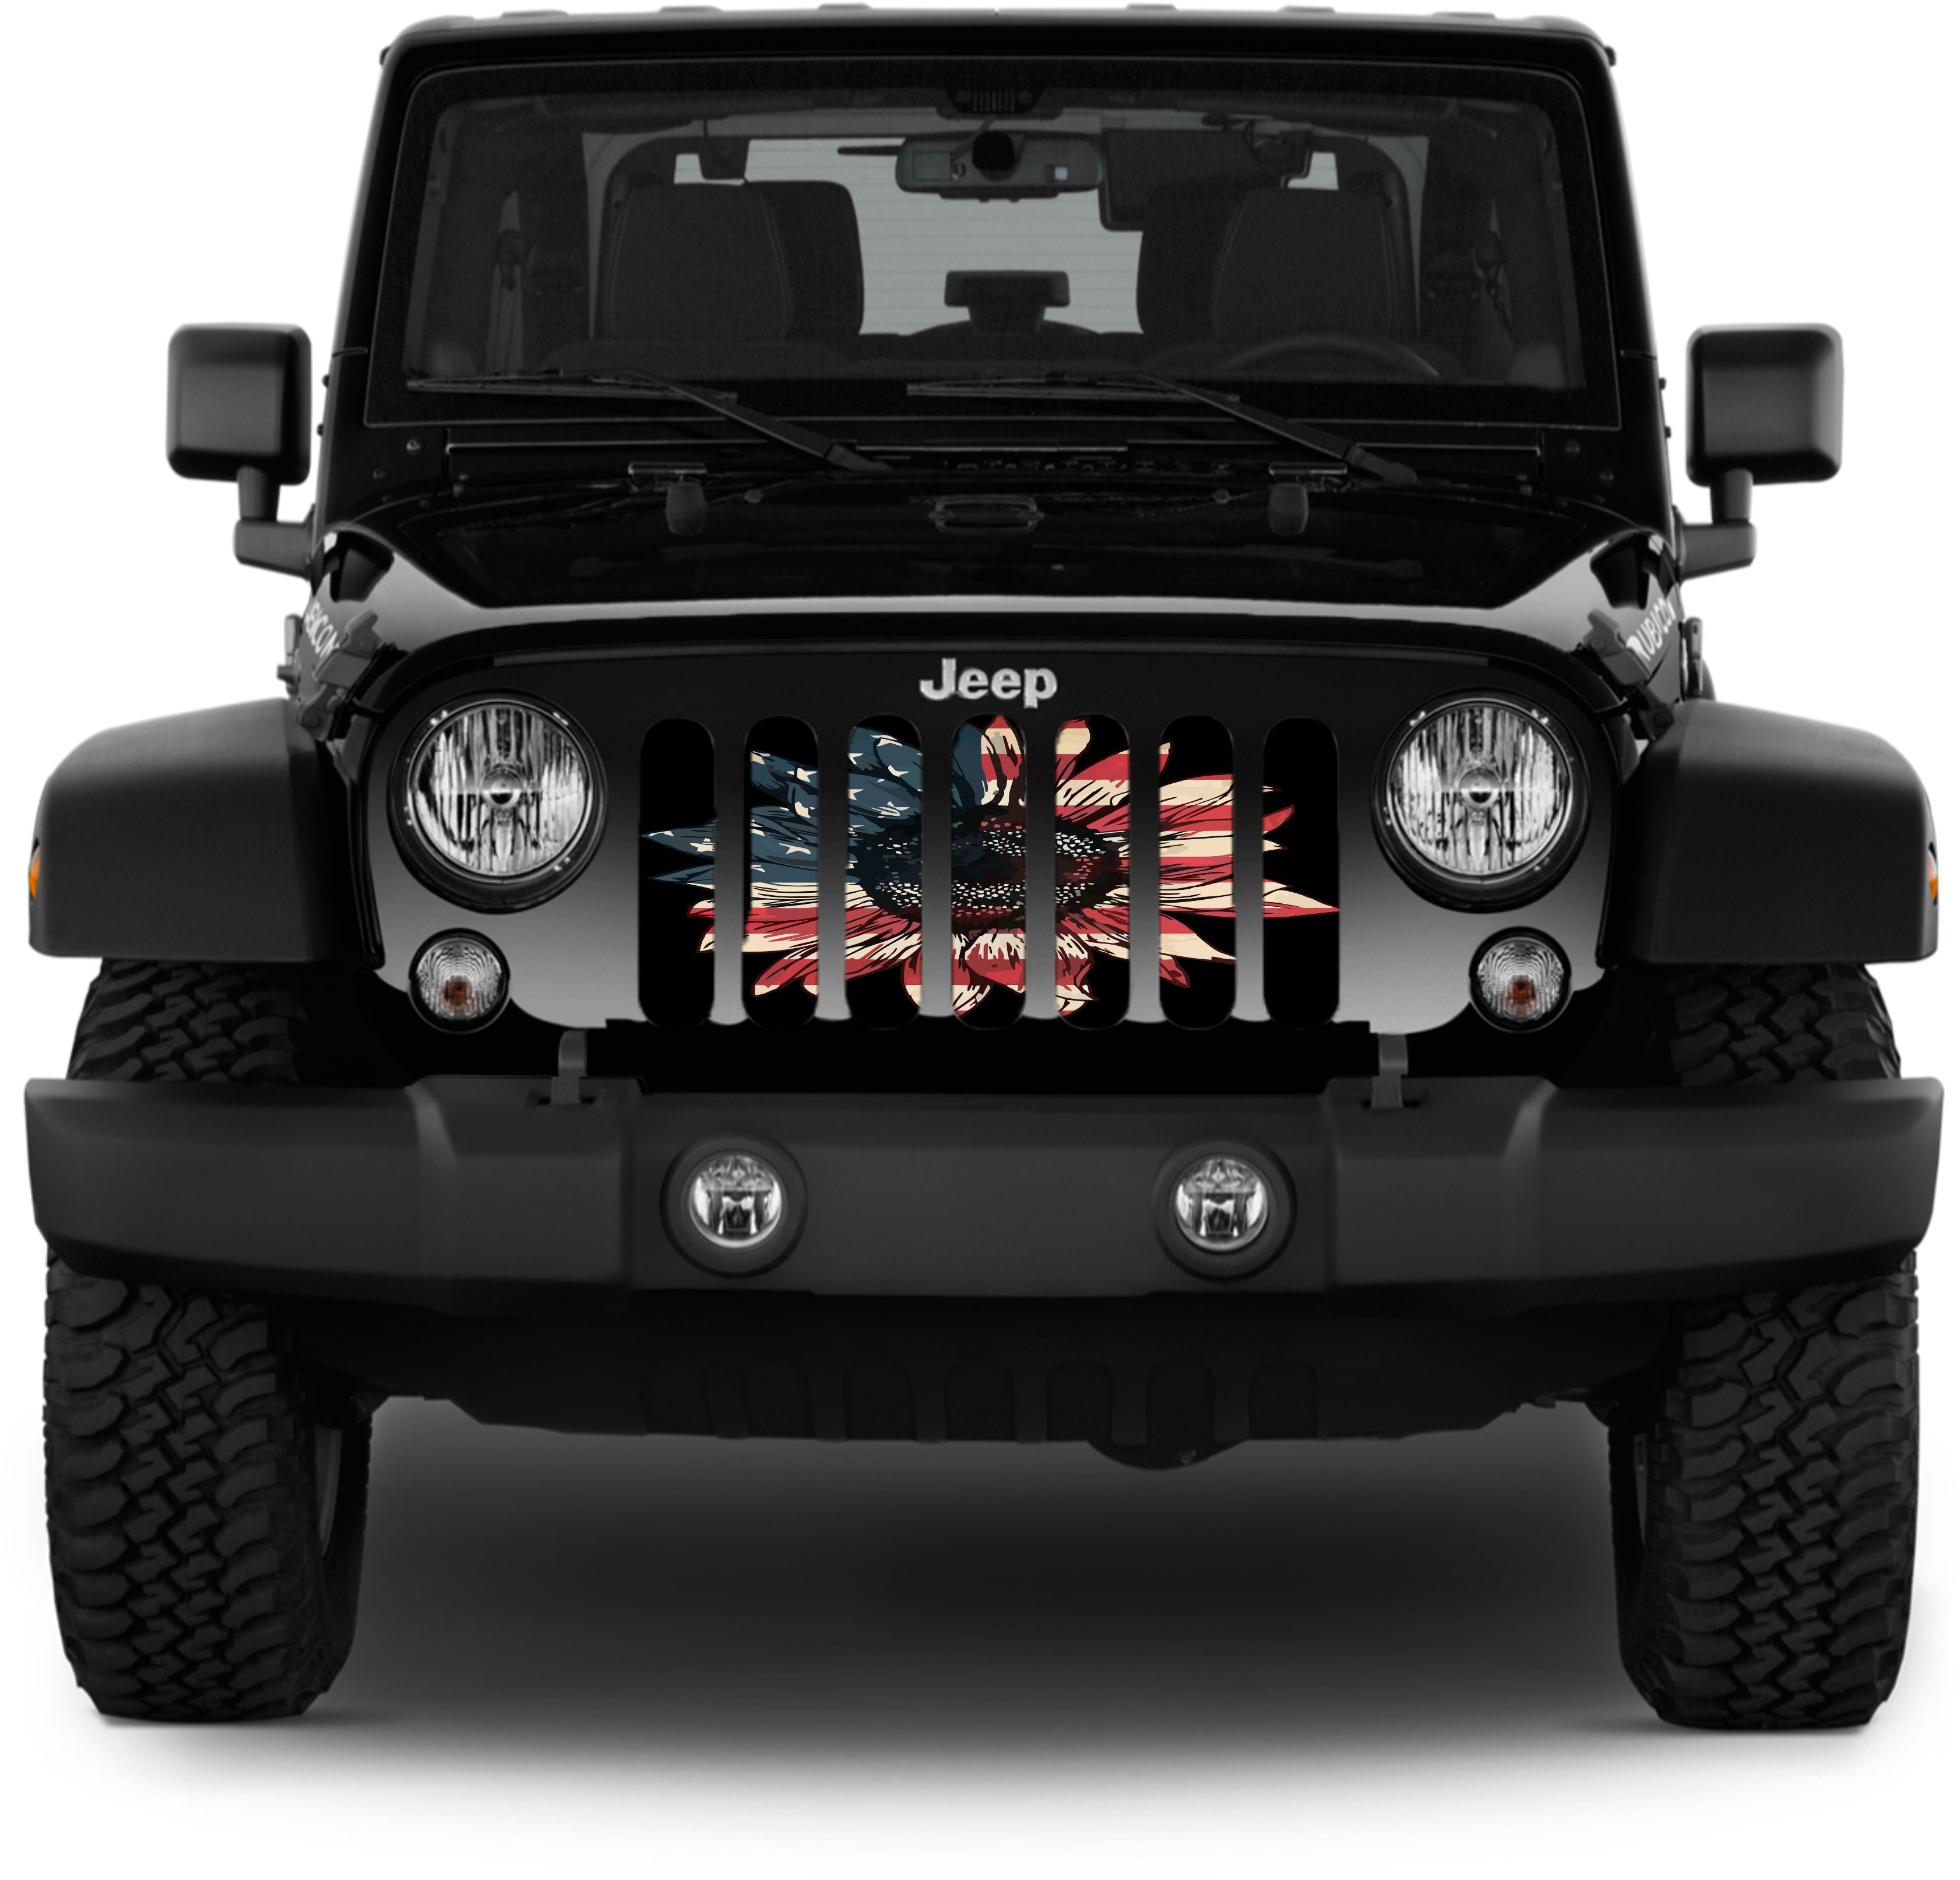 Vintage American Flag Sunflower Mesh Grille Insert for Jeep